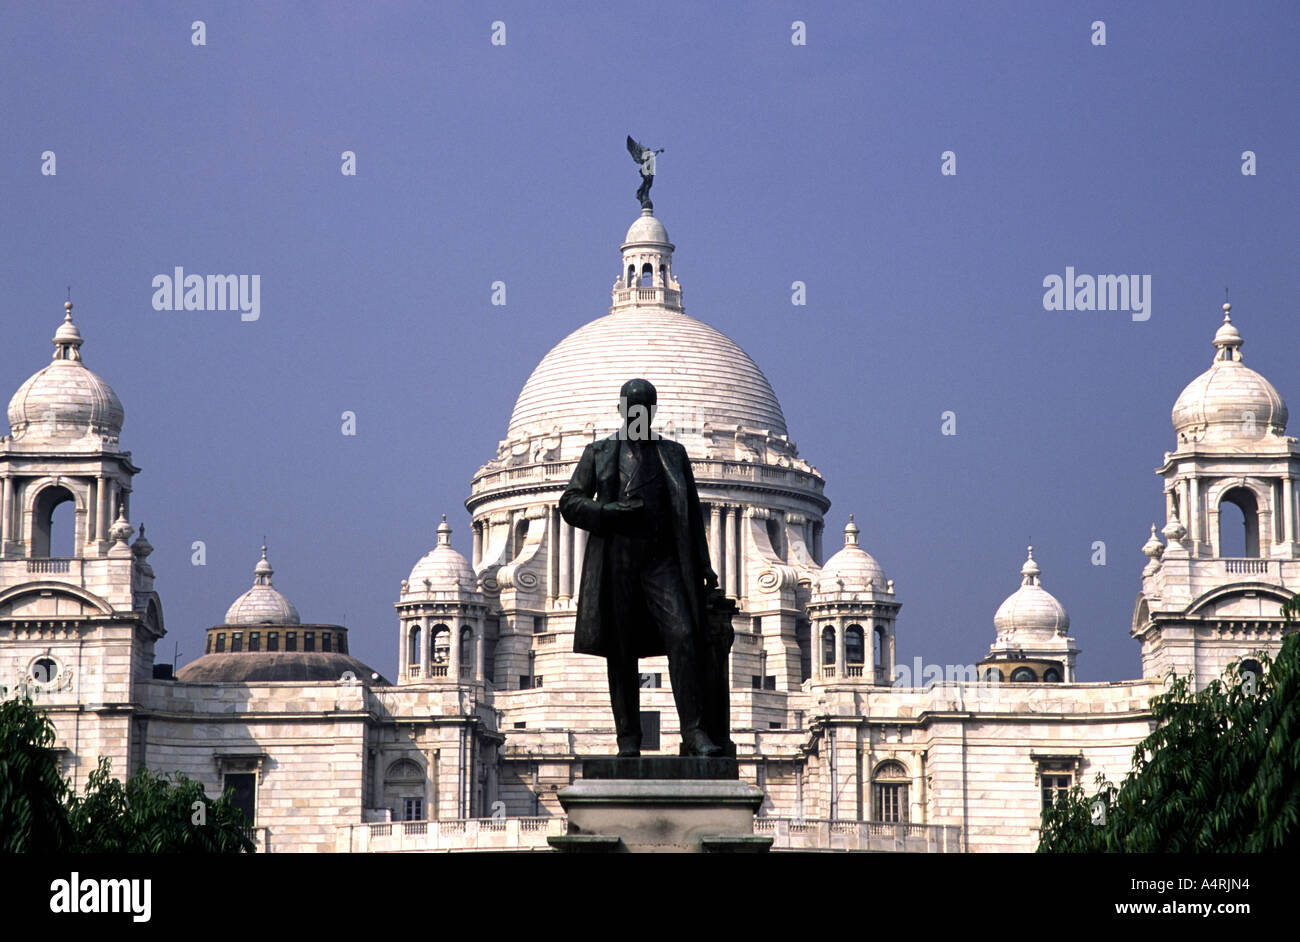 Statue of Sir Andrew Henderson Leith Fraser in front of the Victoria Memorial Hall, Calcutta, West Bengal, India Stock Photo